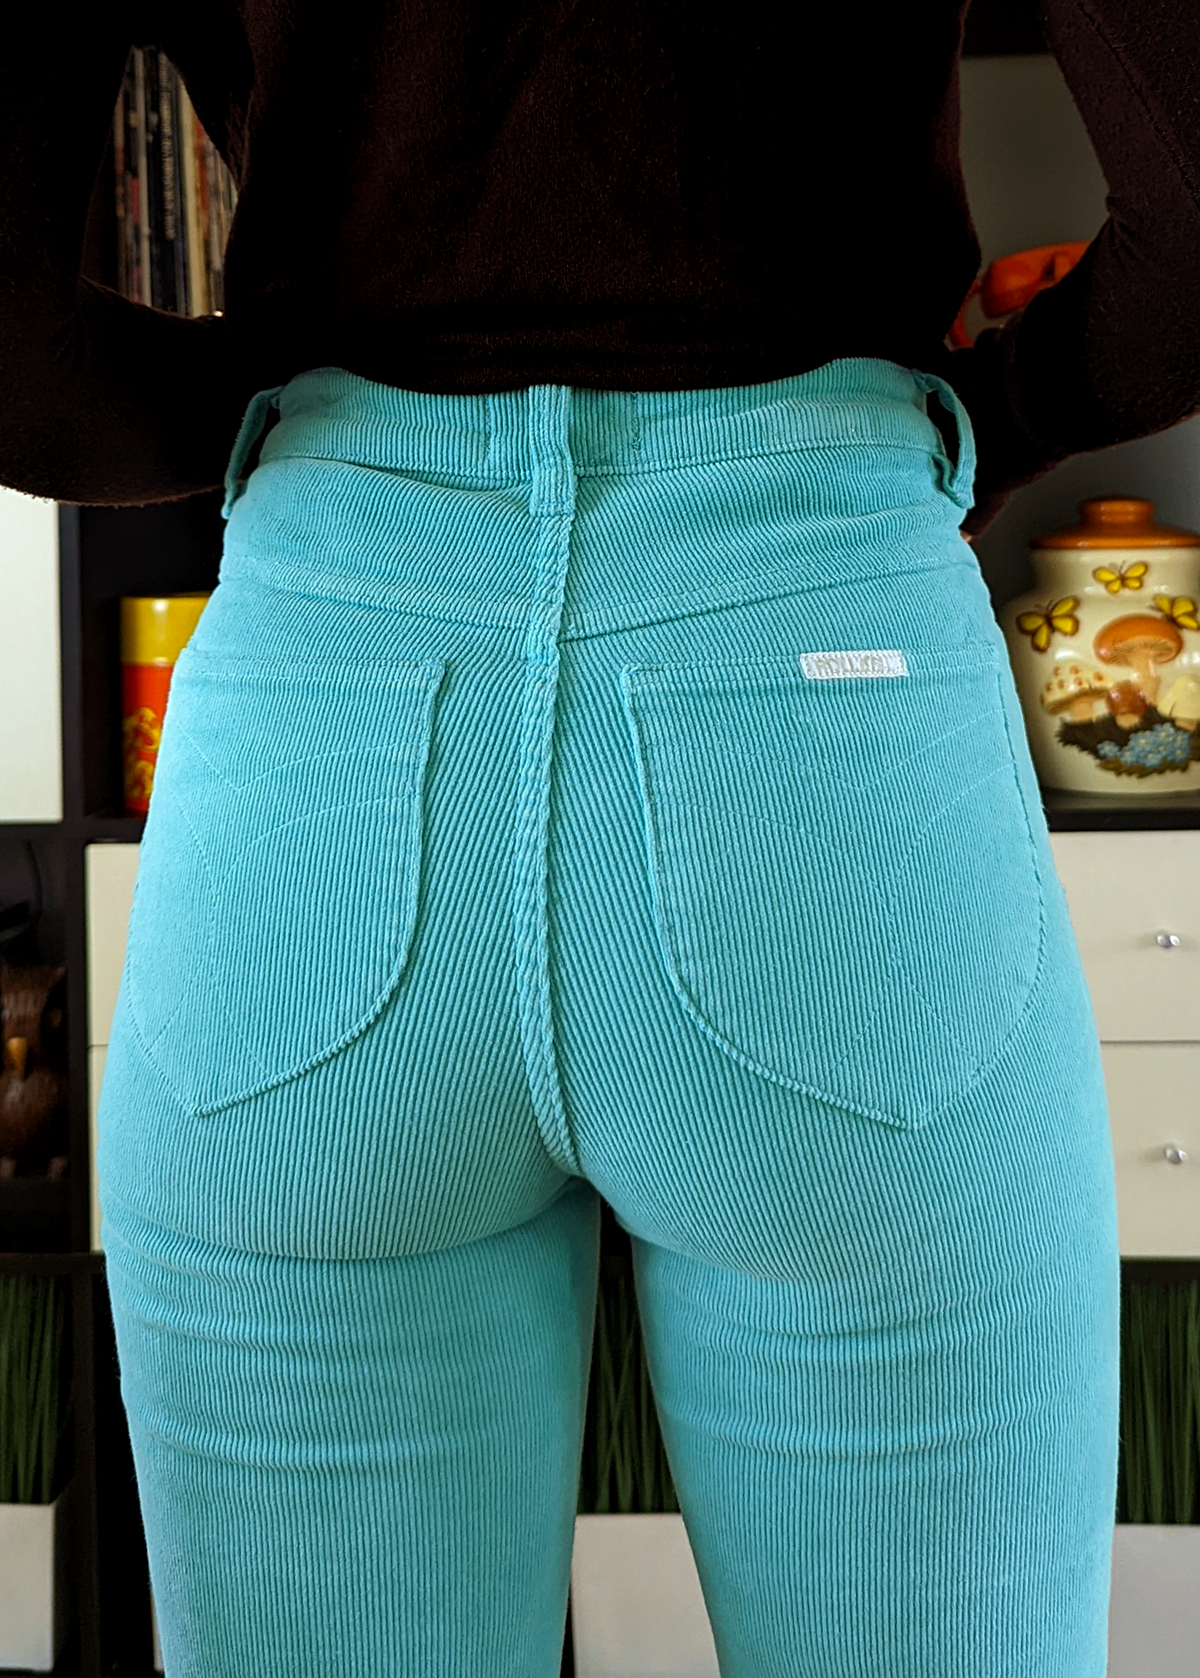 Rolla's Jeans Turquoise Corduroy Flares. 70s inspired bell bottoms with a high rise waist, velvety thin wale corduroy, and a flare leg